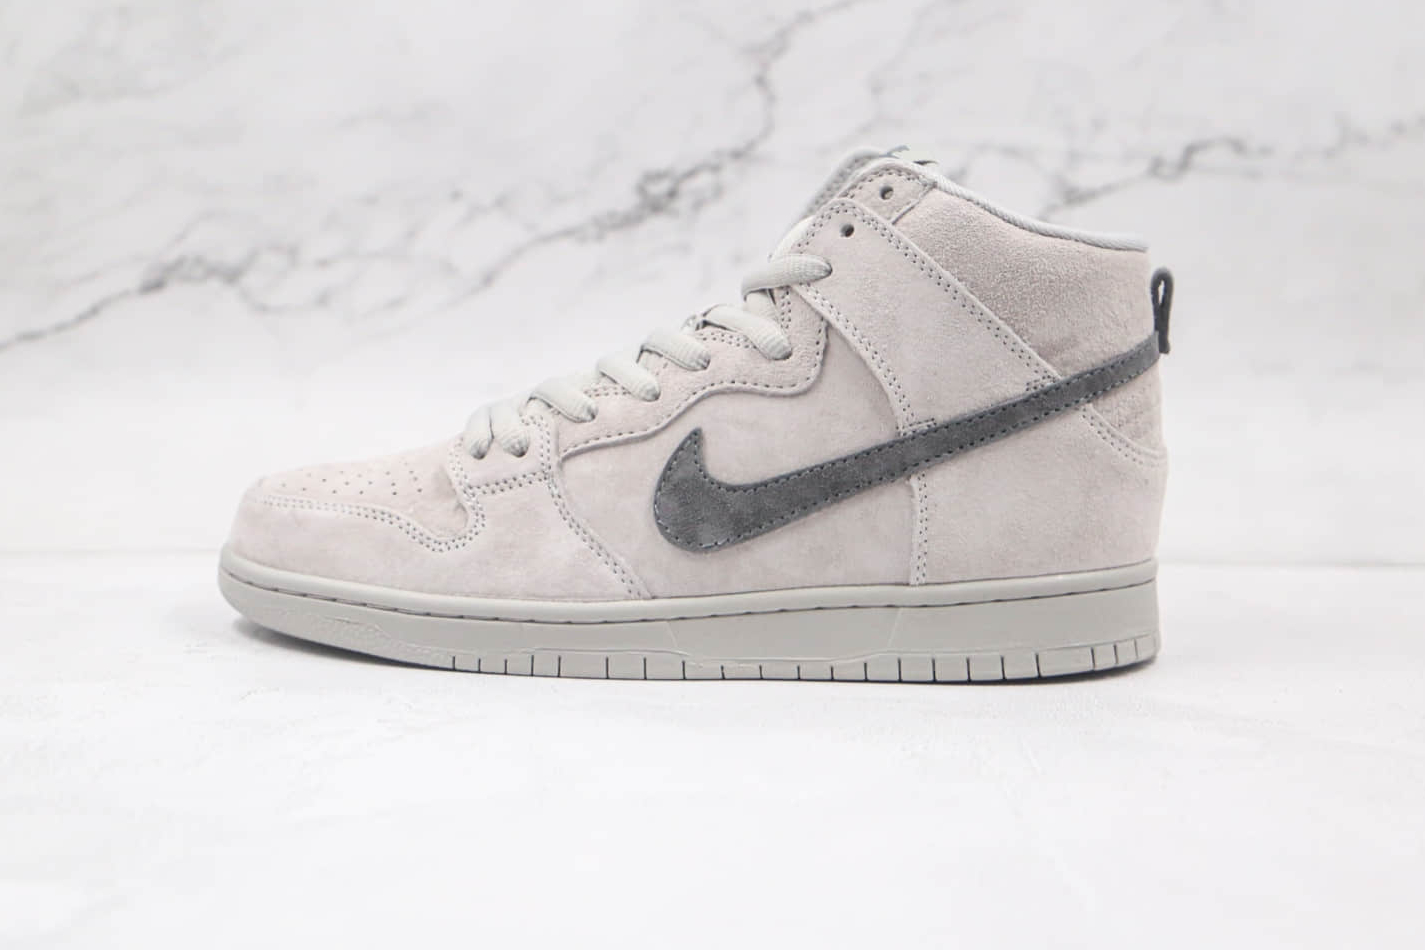 Nike SB Dunk High PRM Grey Box Metallic Silver Hyper Verde 313171-036: Shop the latest release of premium skate shoes for enhanced style and performance.